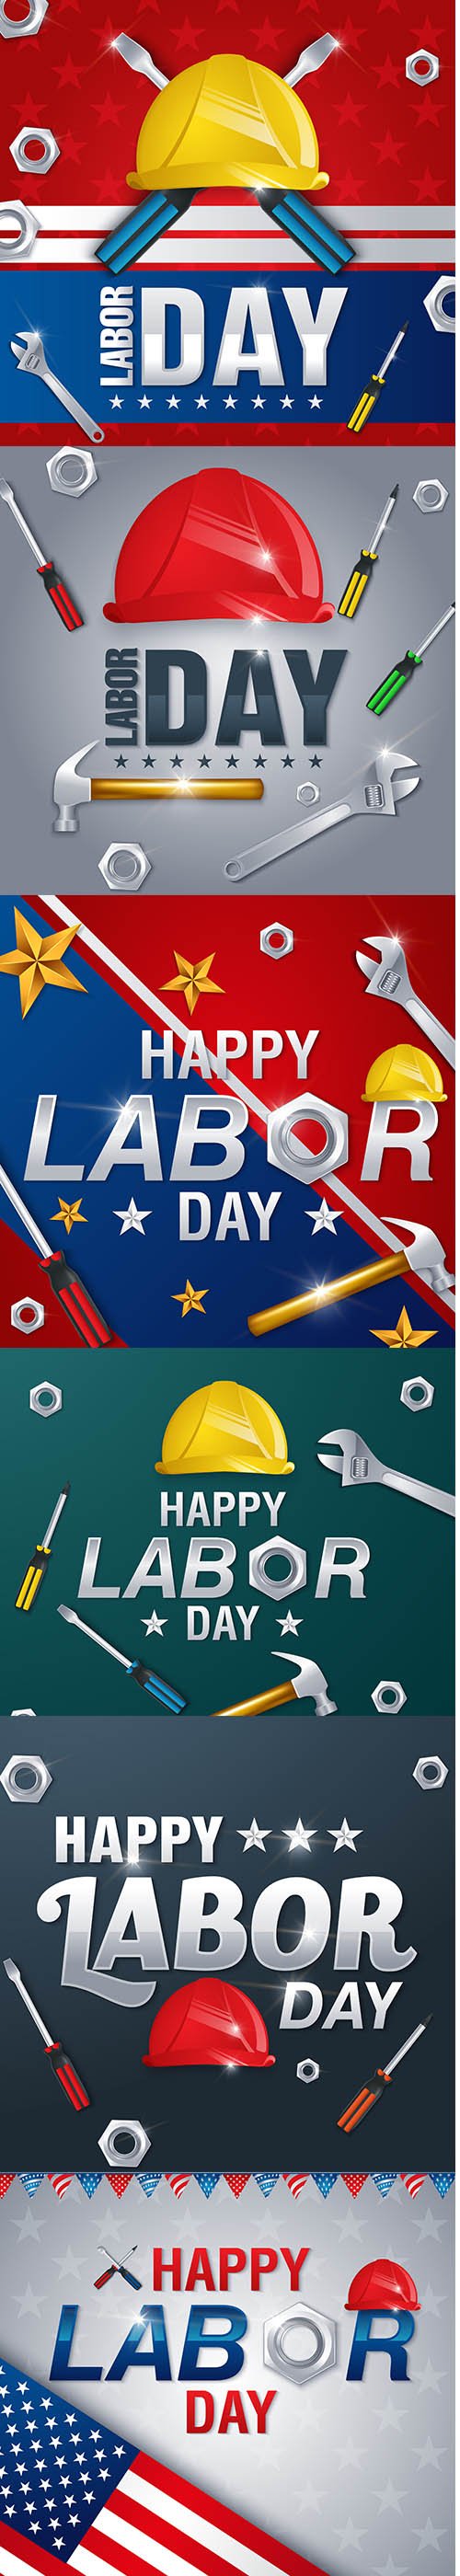 Vector Illustrations of Happy Labor Day USA